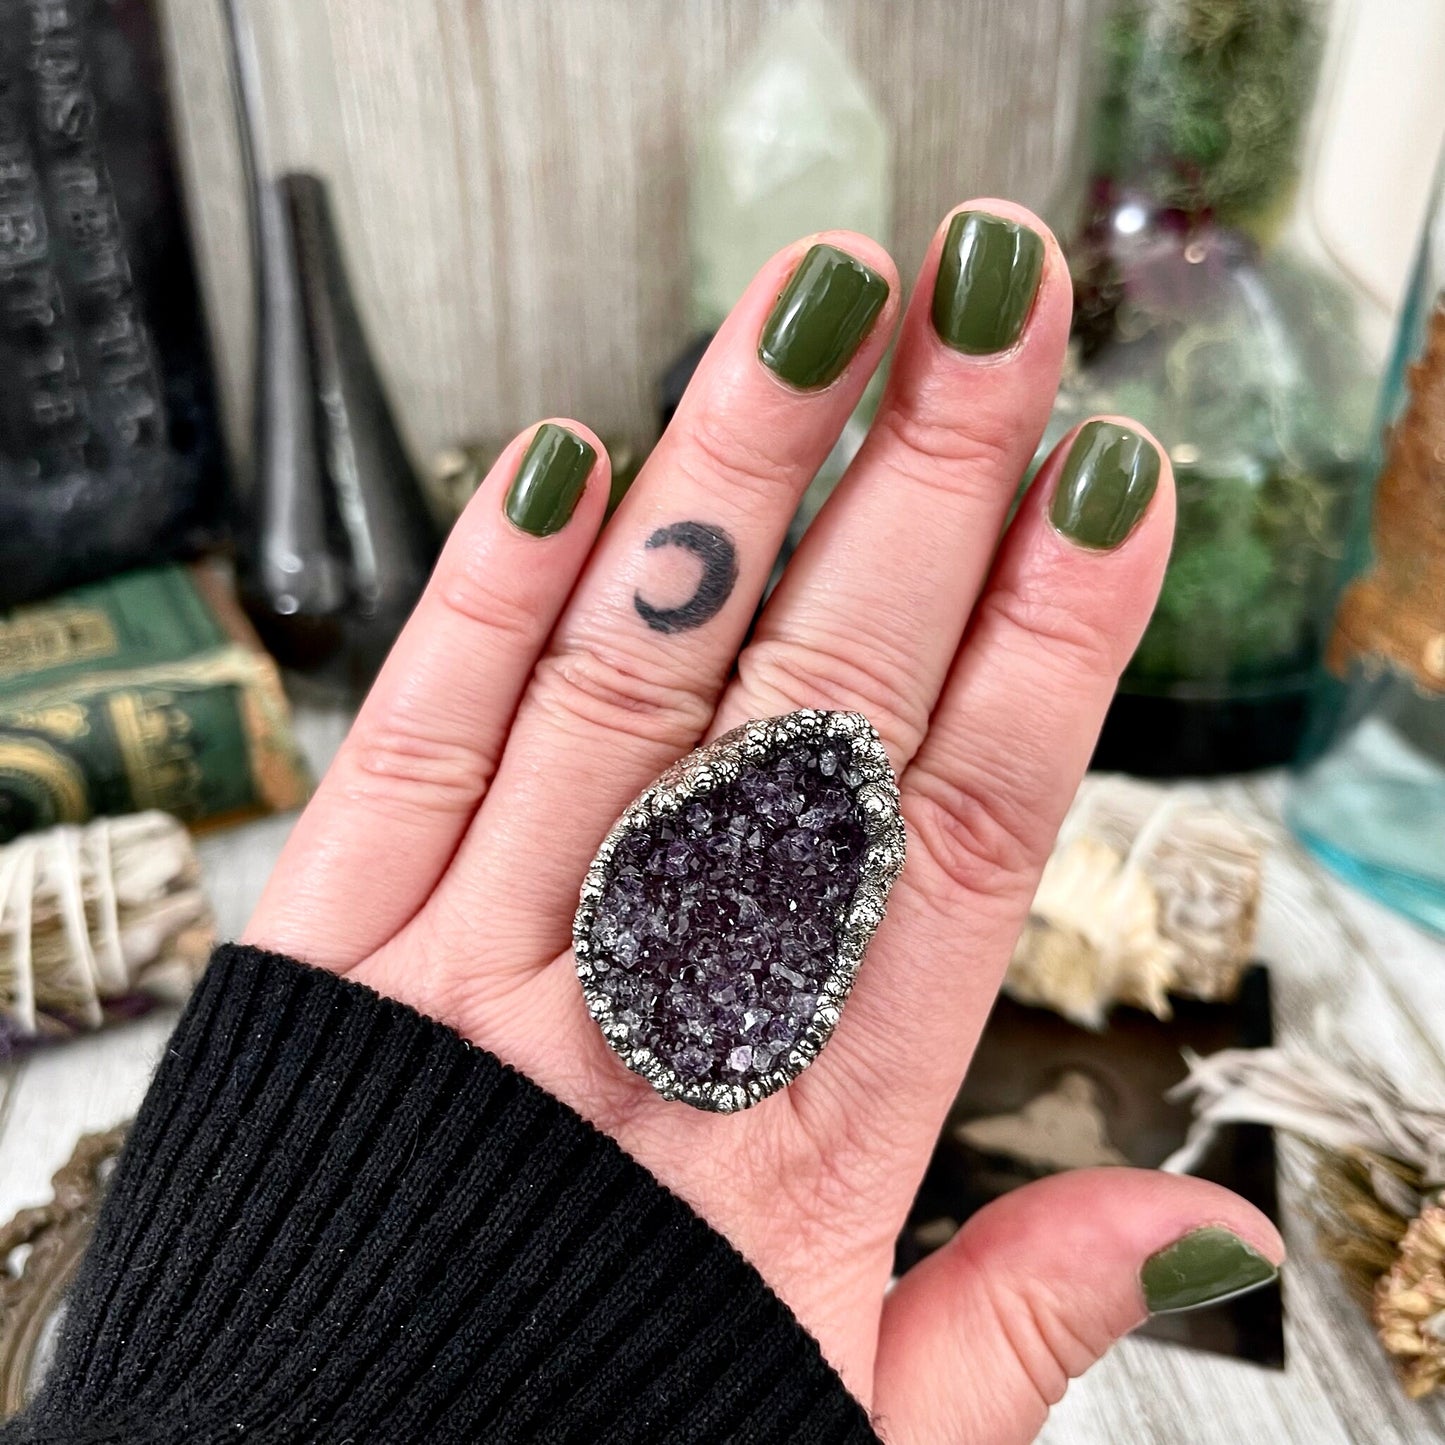 Size 8.5 Big Raw Amethyst Purple Crystal Ring in Fine Silver / Foxlark Collection - One of a Kind / Big Crystal Ring Witchy Jewelry Gemstone